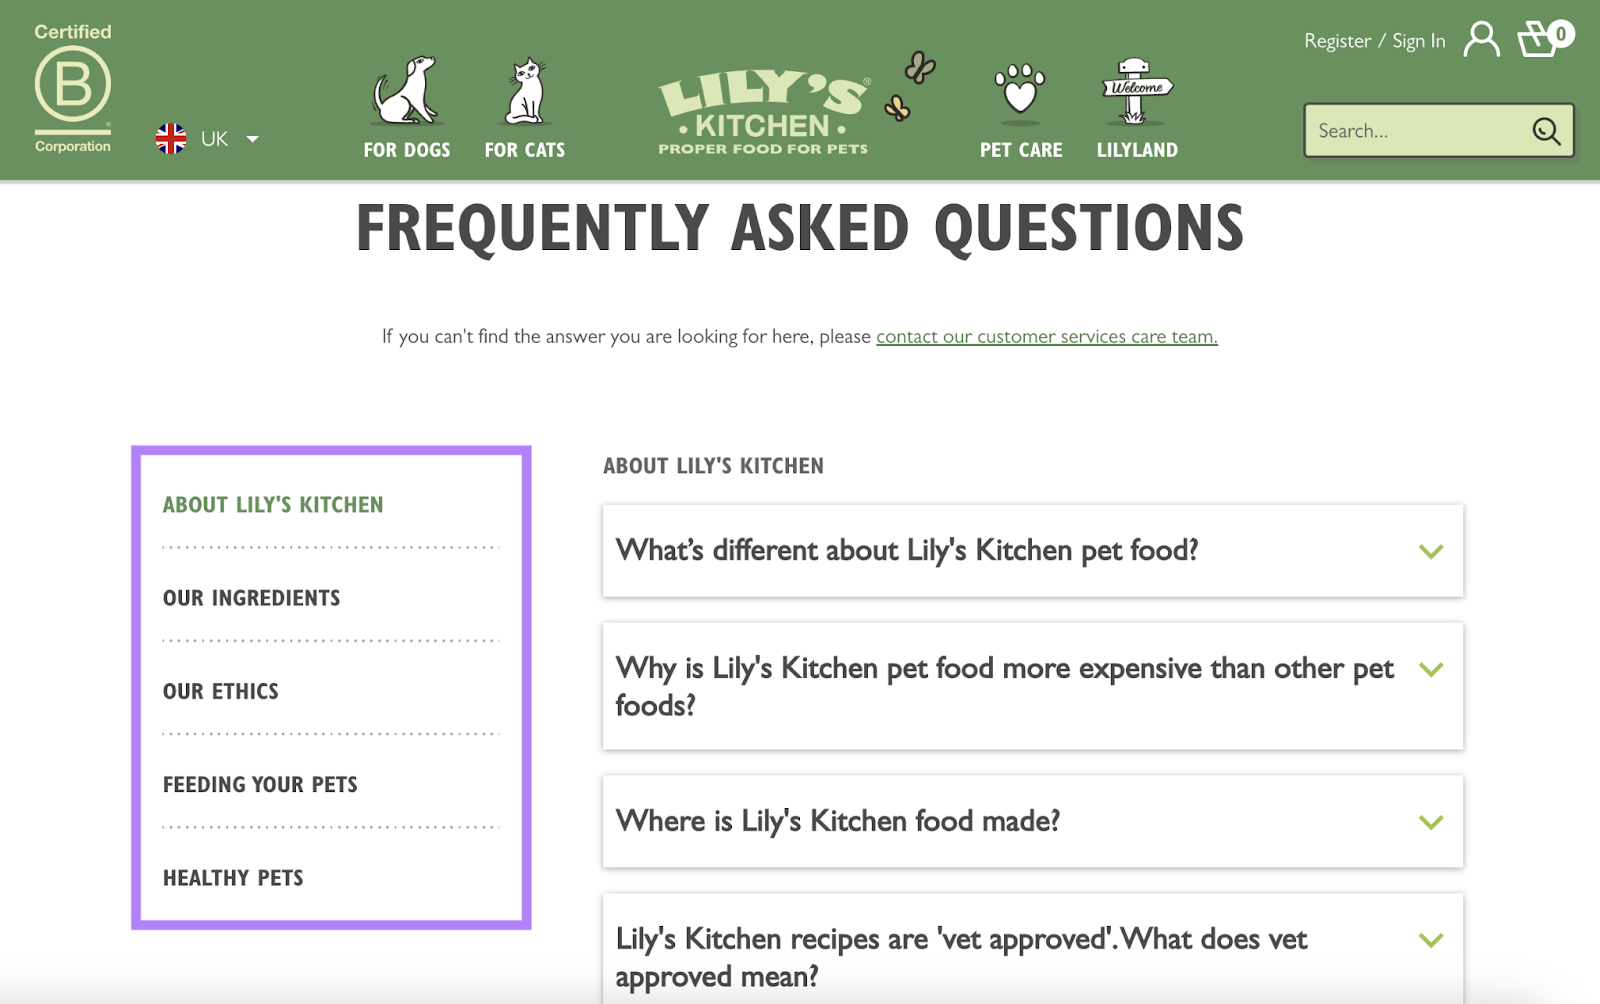 faqs in the lefthand navigation help you navigate the full page by topic such as ethics, ingredients, and ،w to feed your pets